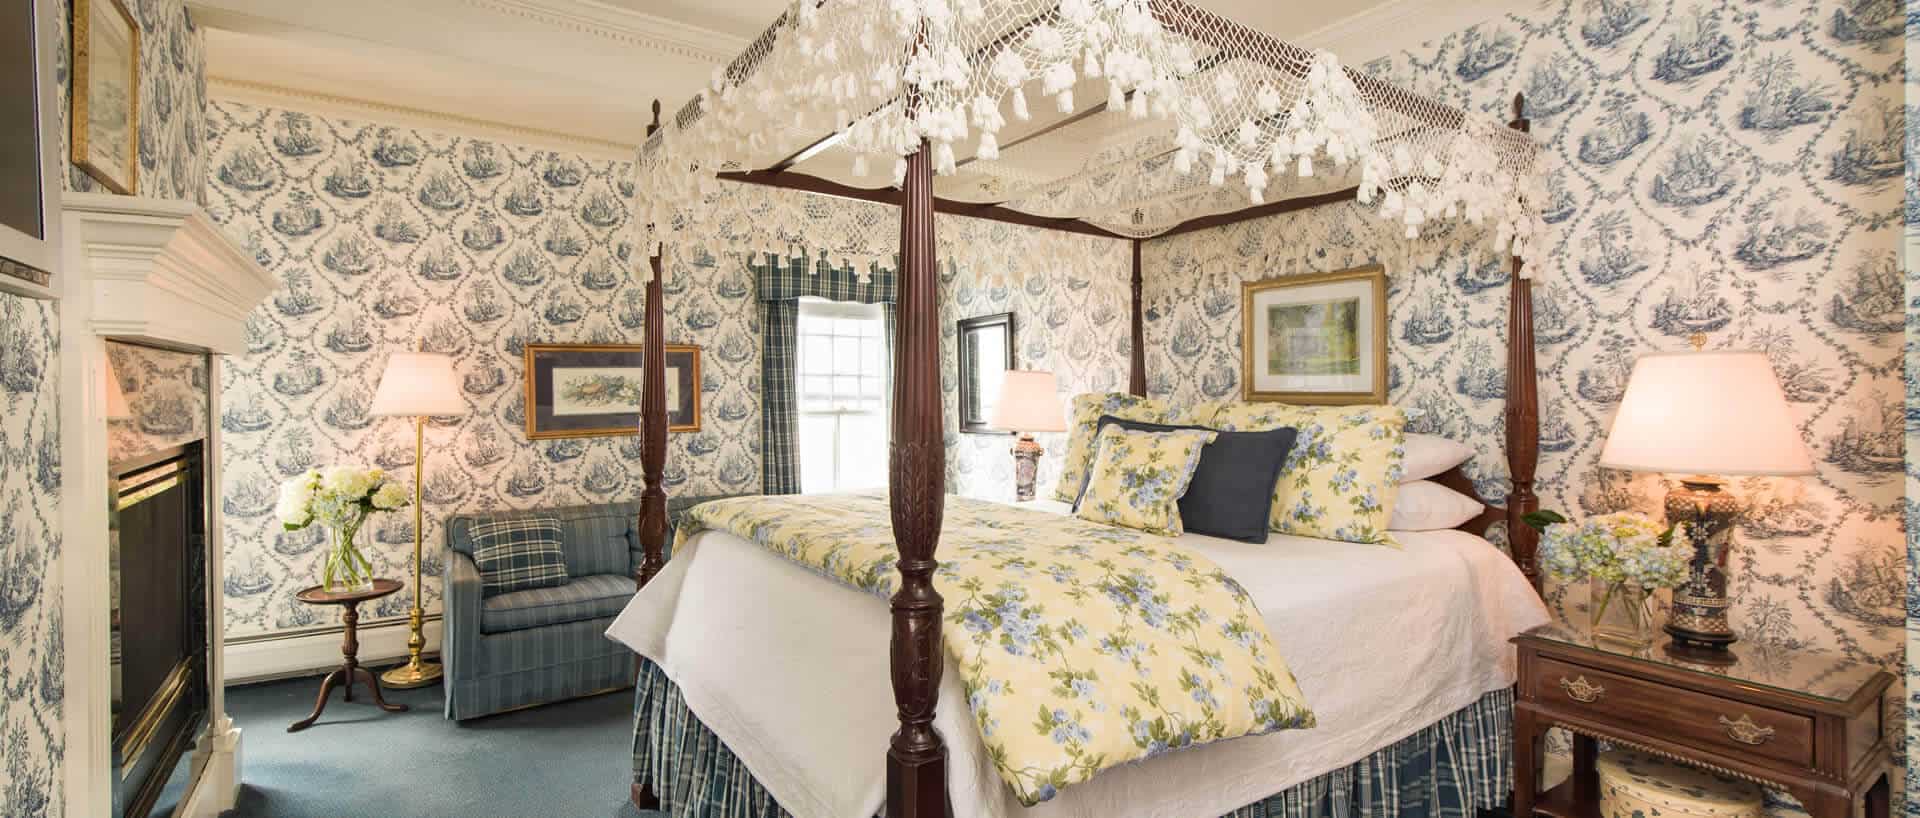 Inn at Ormsby Hill - Eliza Room with Four Poster Bed and Fireplace